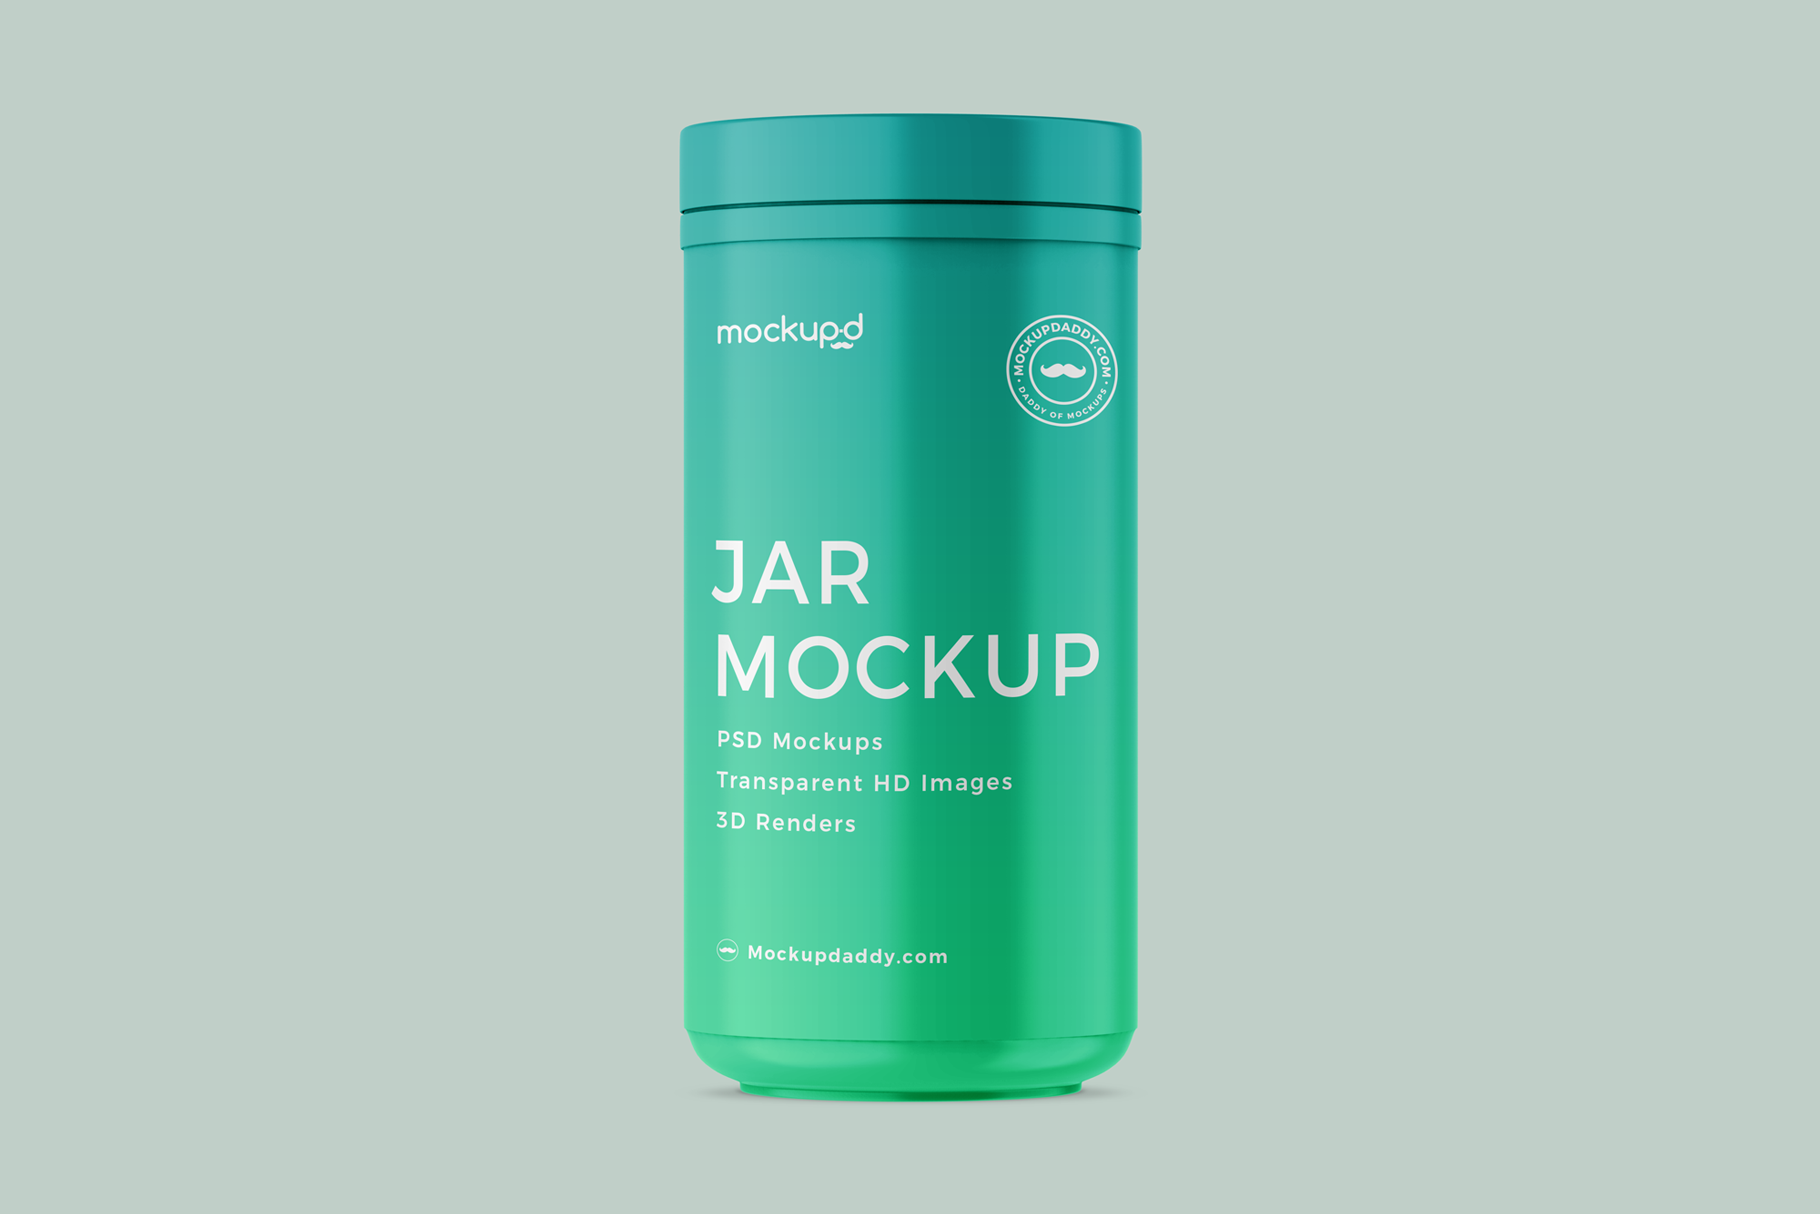 Green 3D Supplement Jar Mockup with green lid.